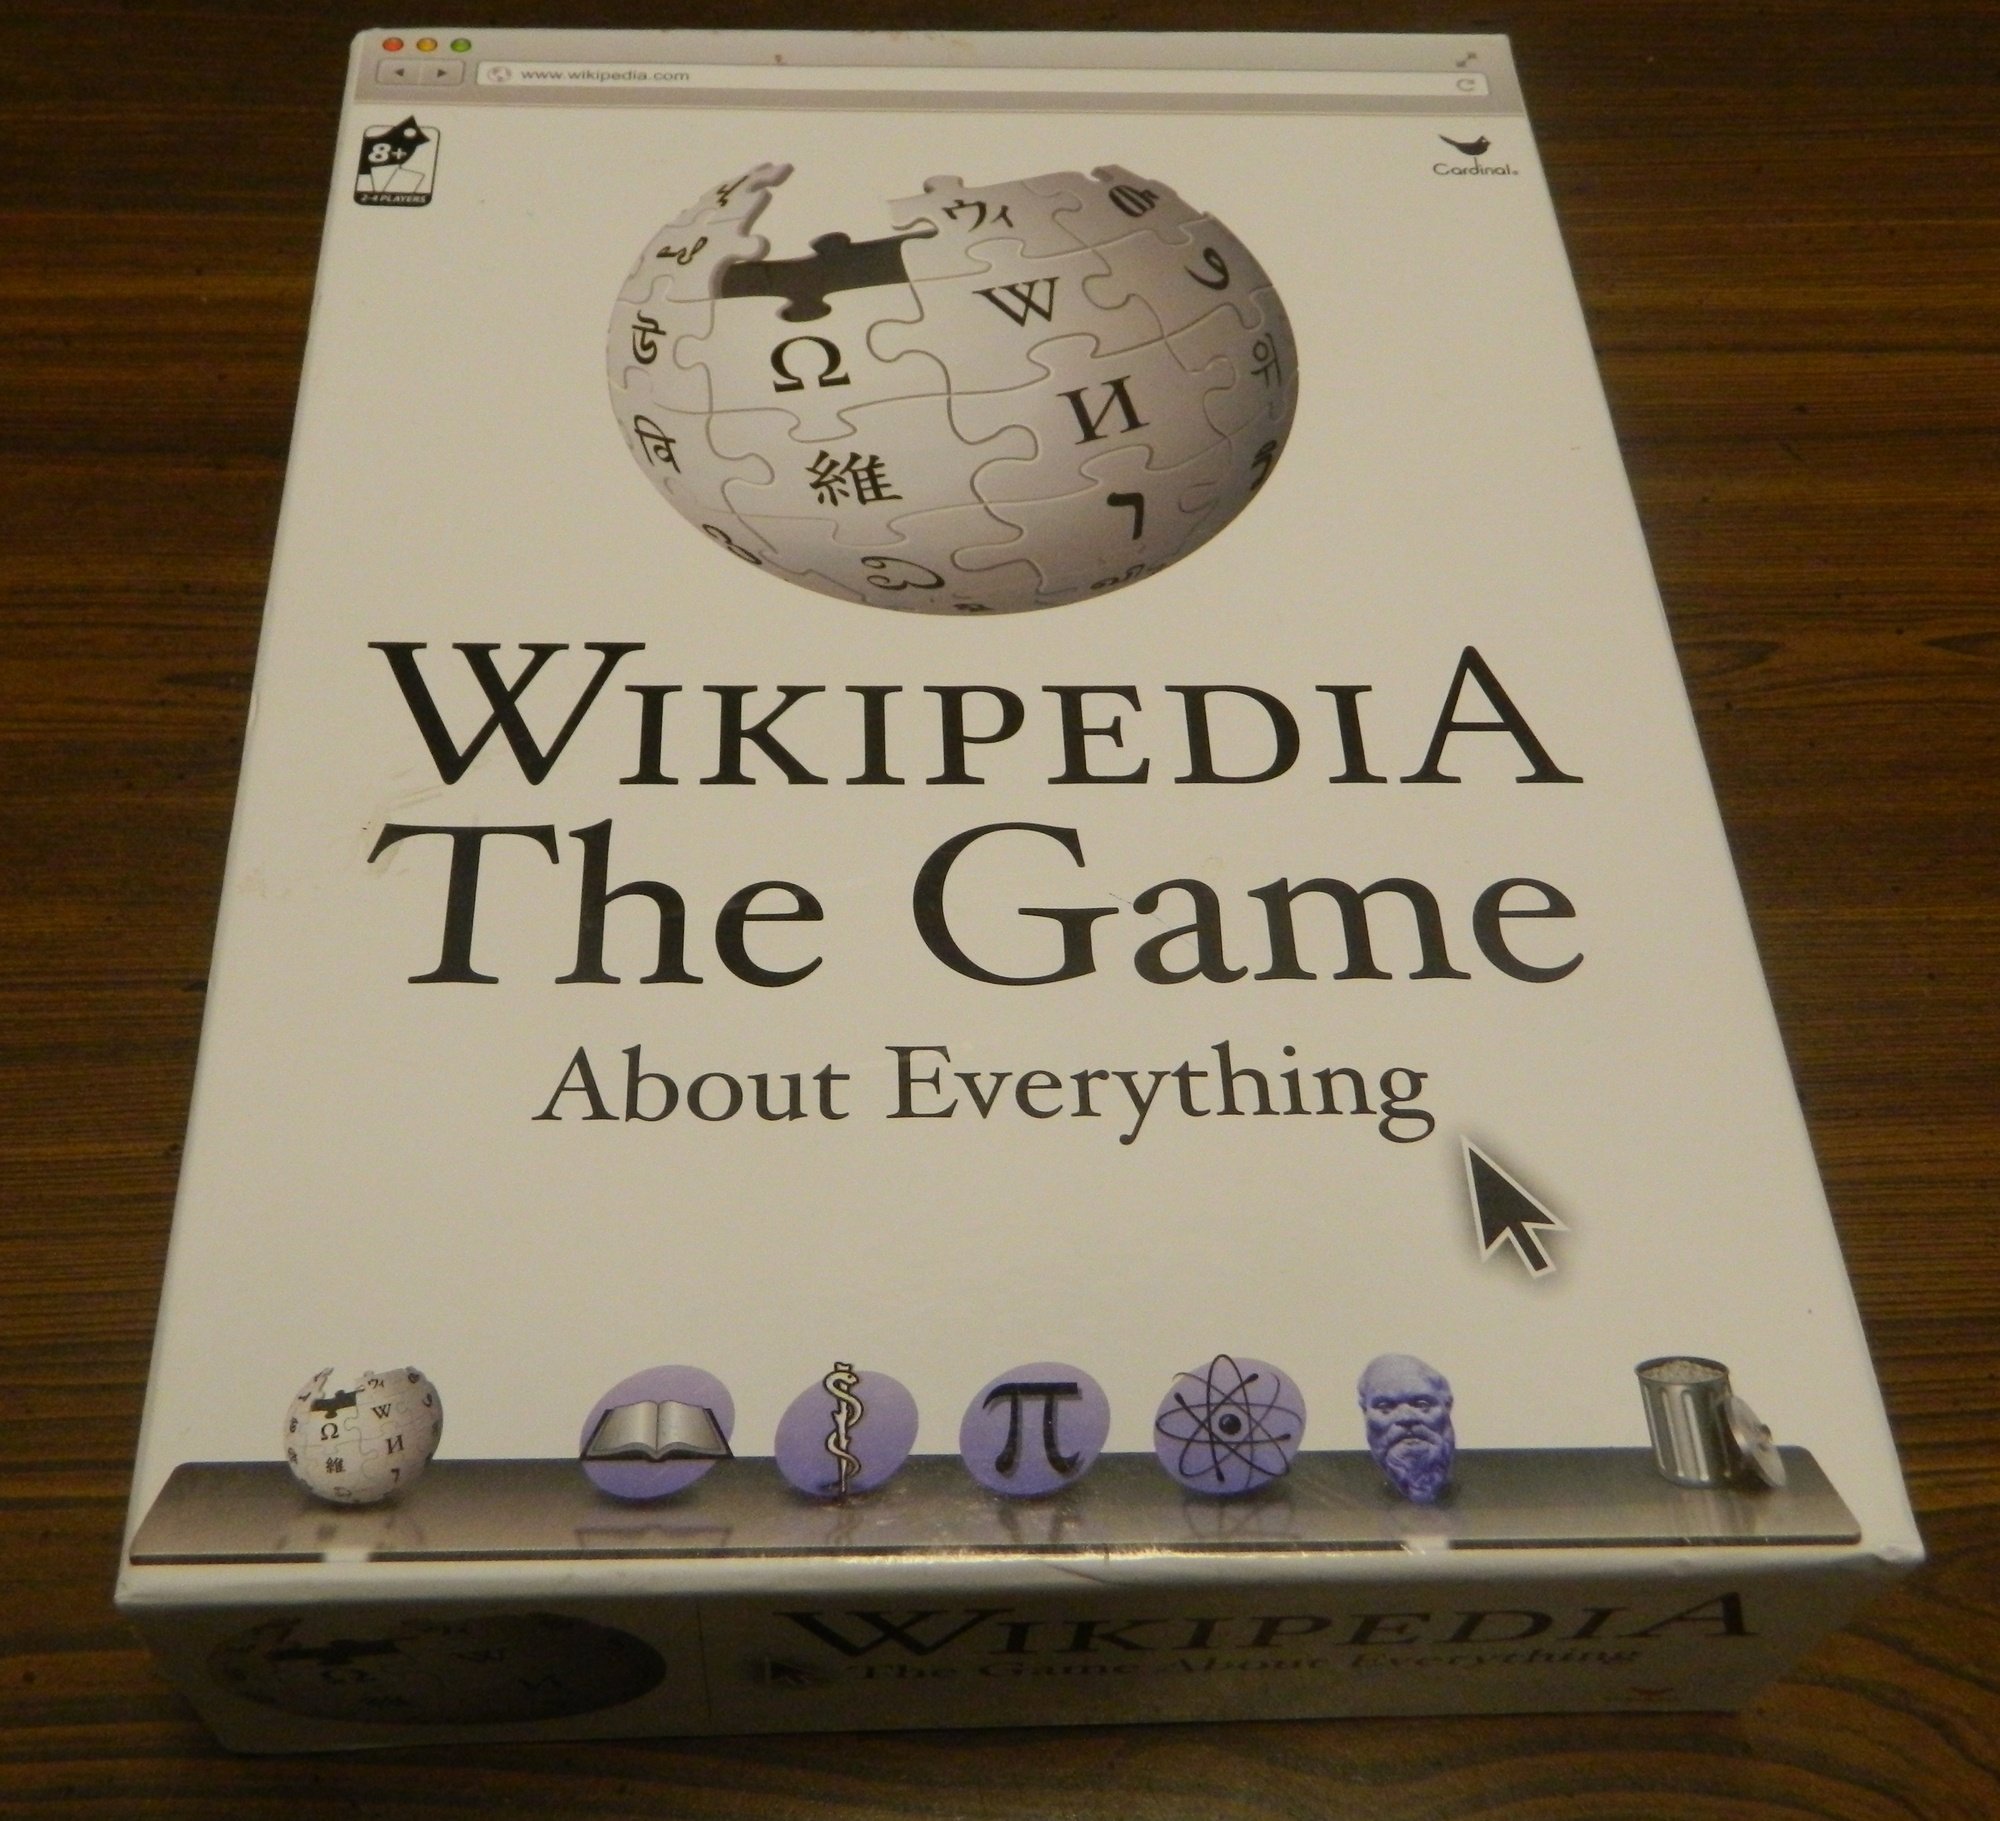 Wikipedia The Game Board Game Review and Rules - Geeky Hobbies